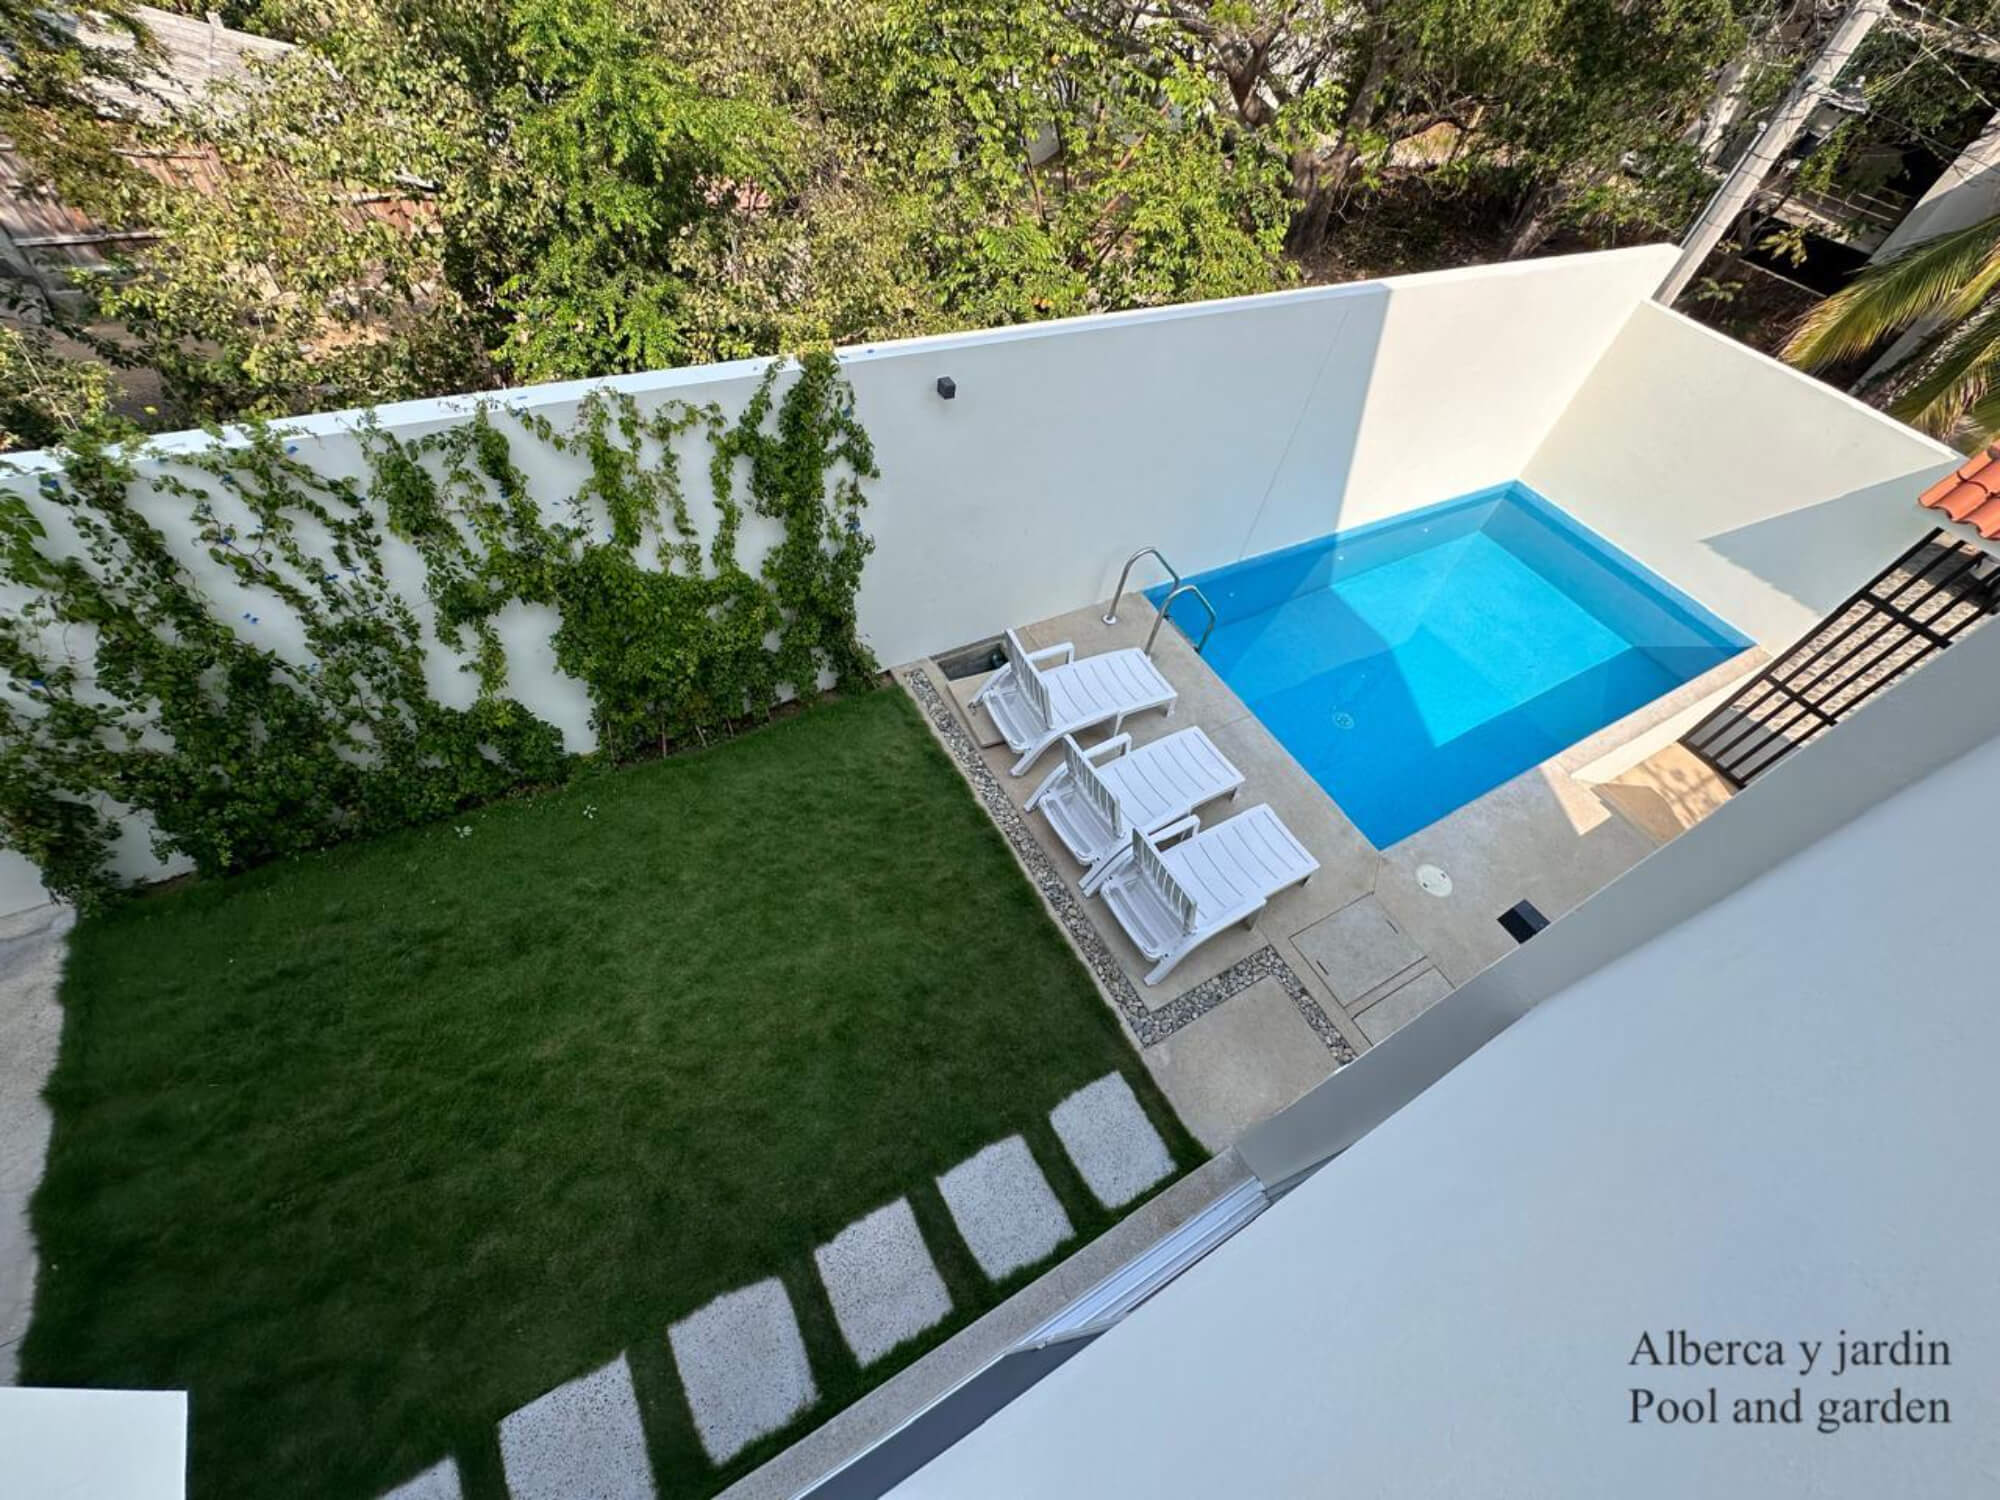 House with ocean view terrace, elevator, solar panel, private pool, 780 m2 land, in gated community “Residencial Conejos”, for sale Huatulco